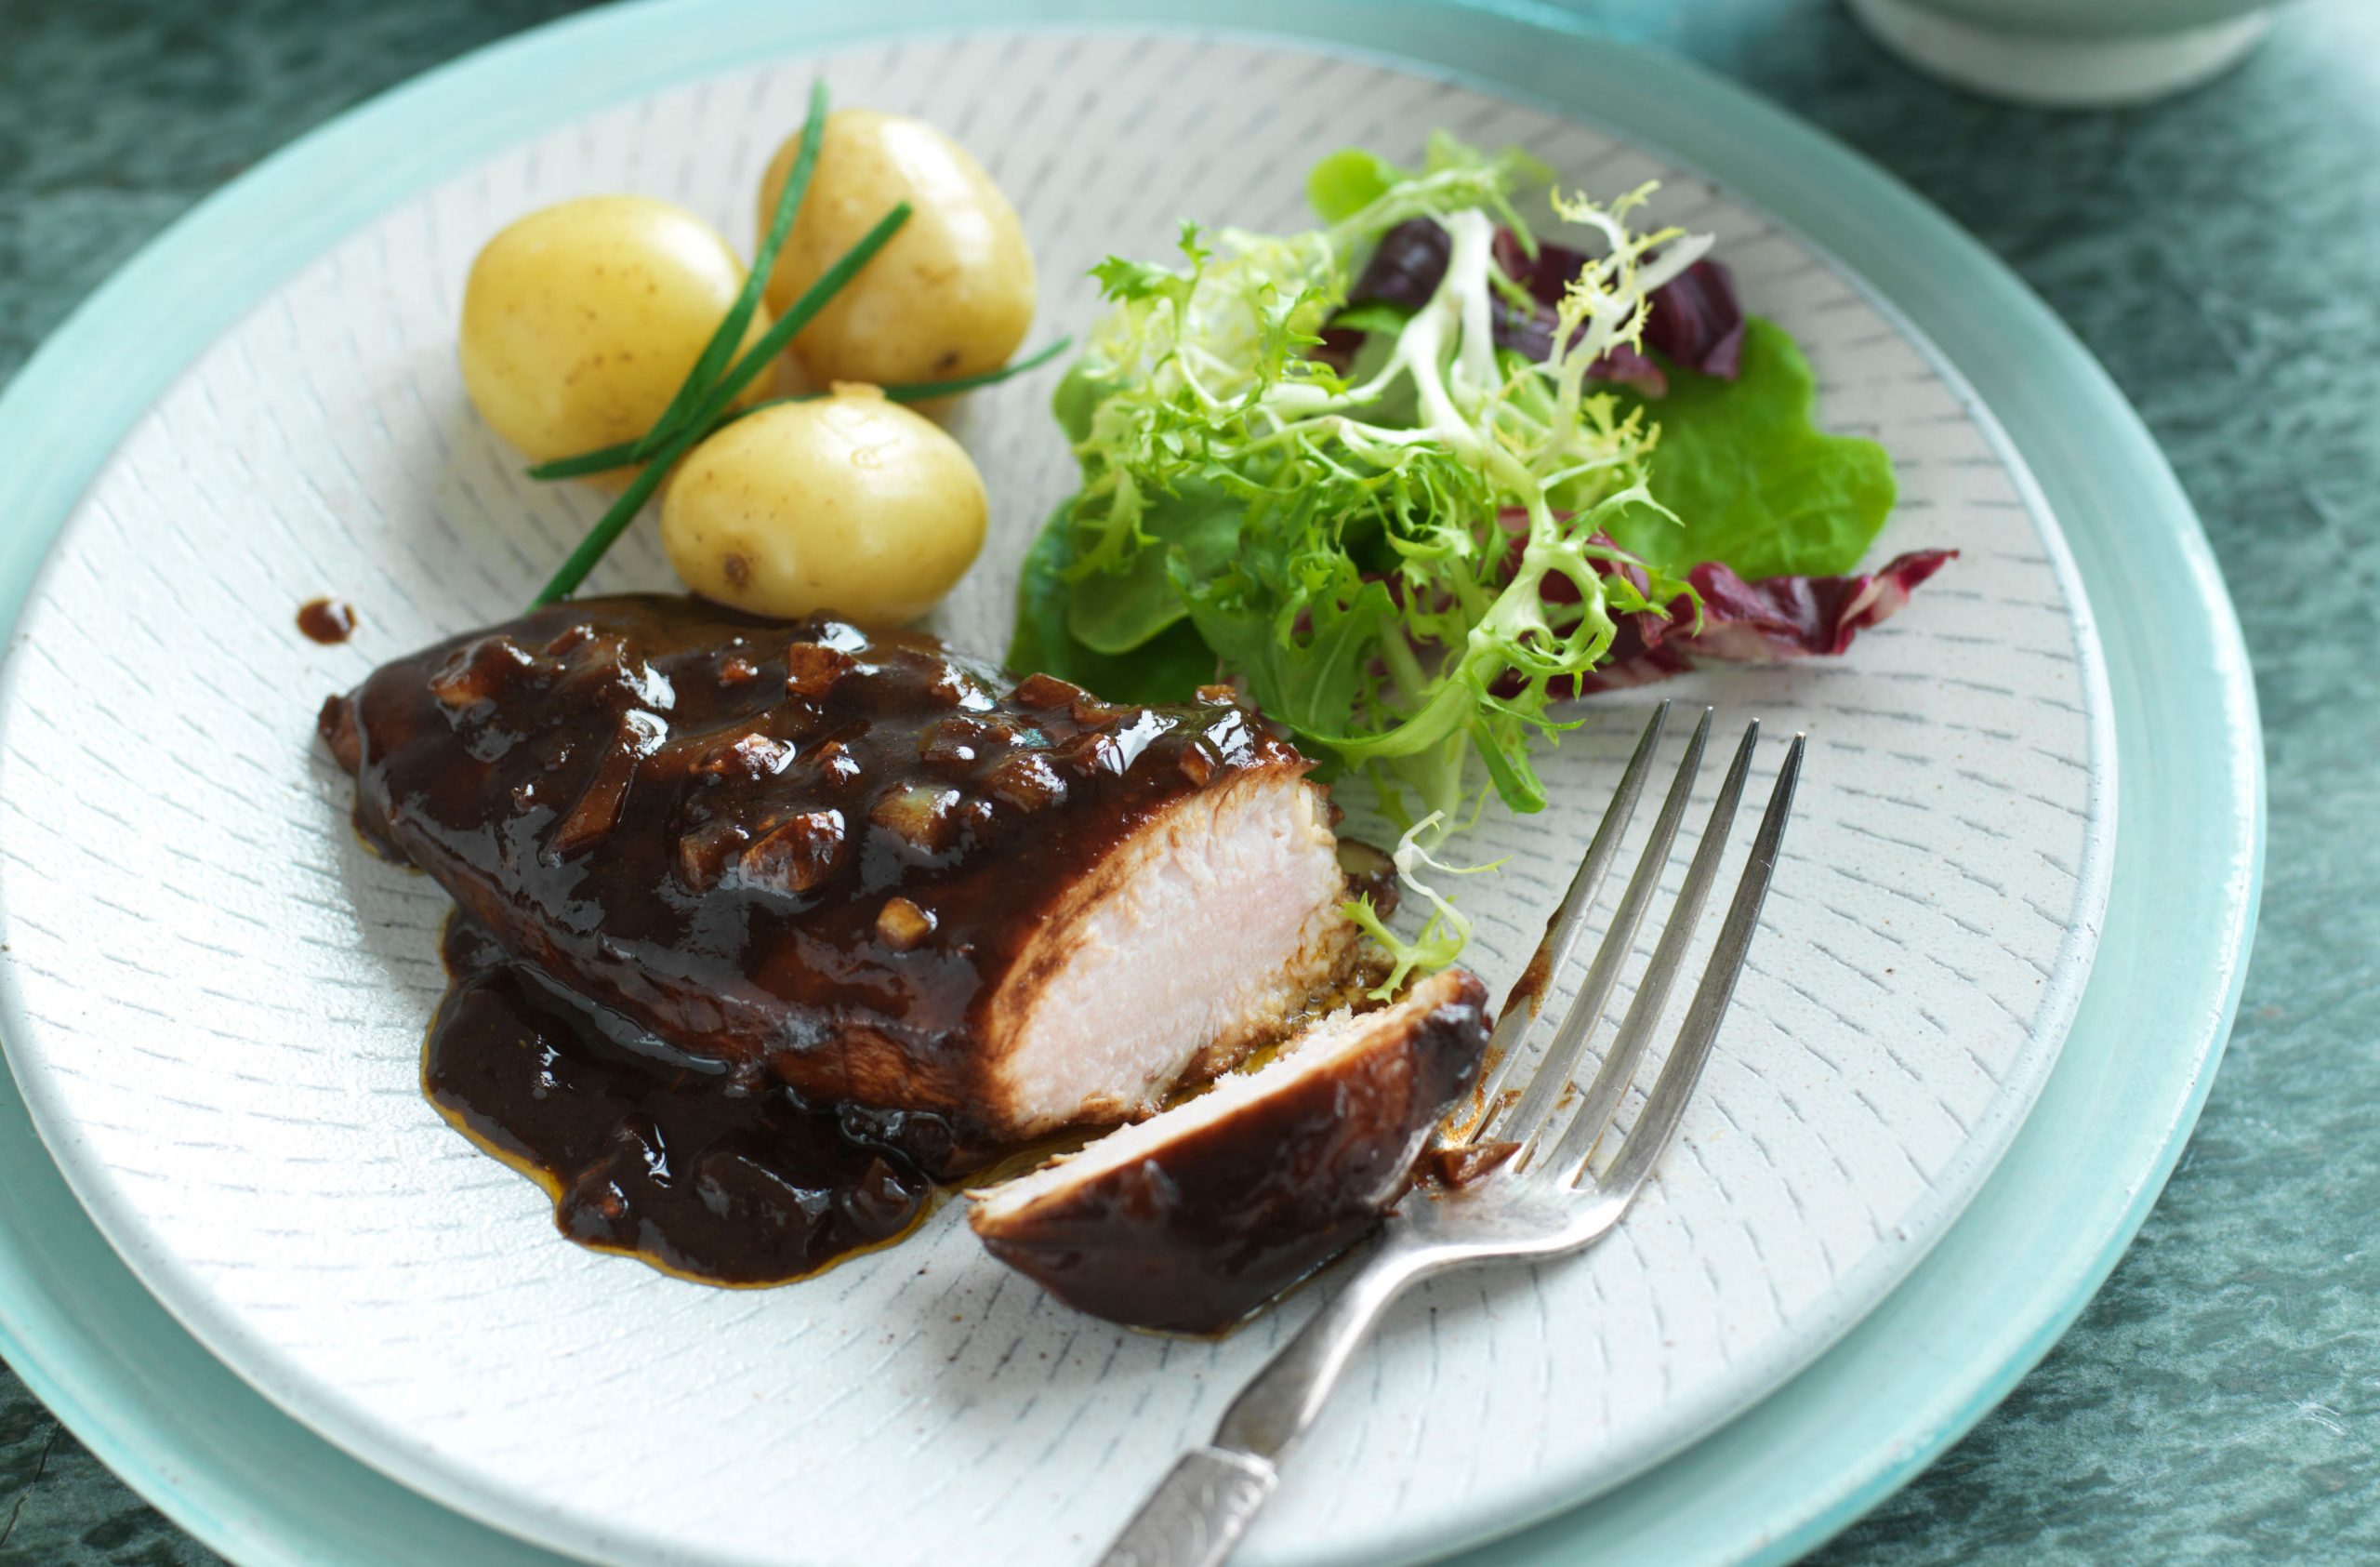 Balsamic barbecue sauce